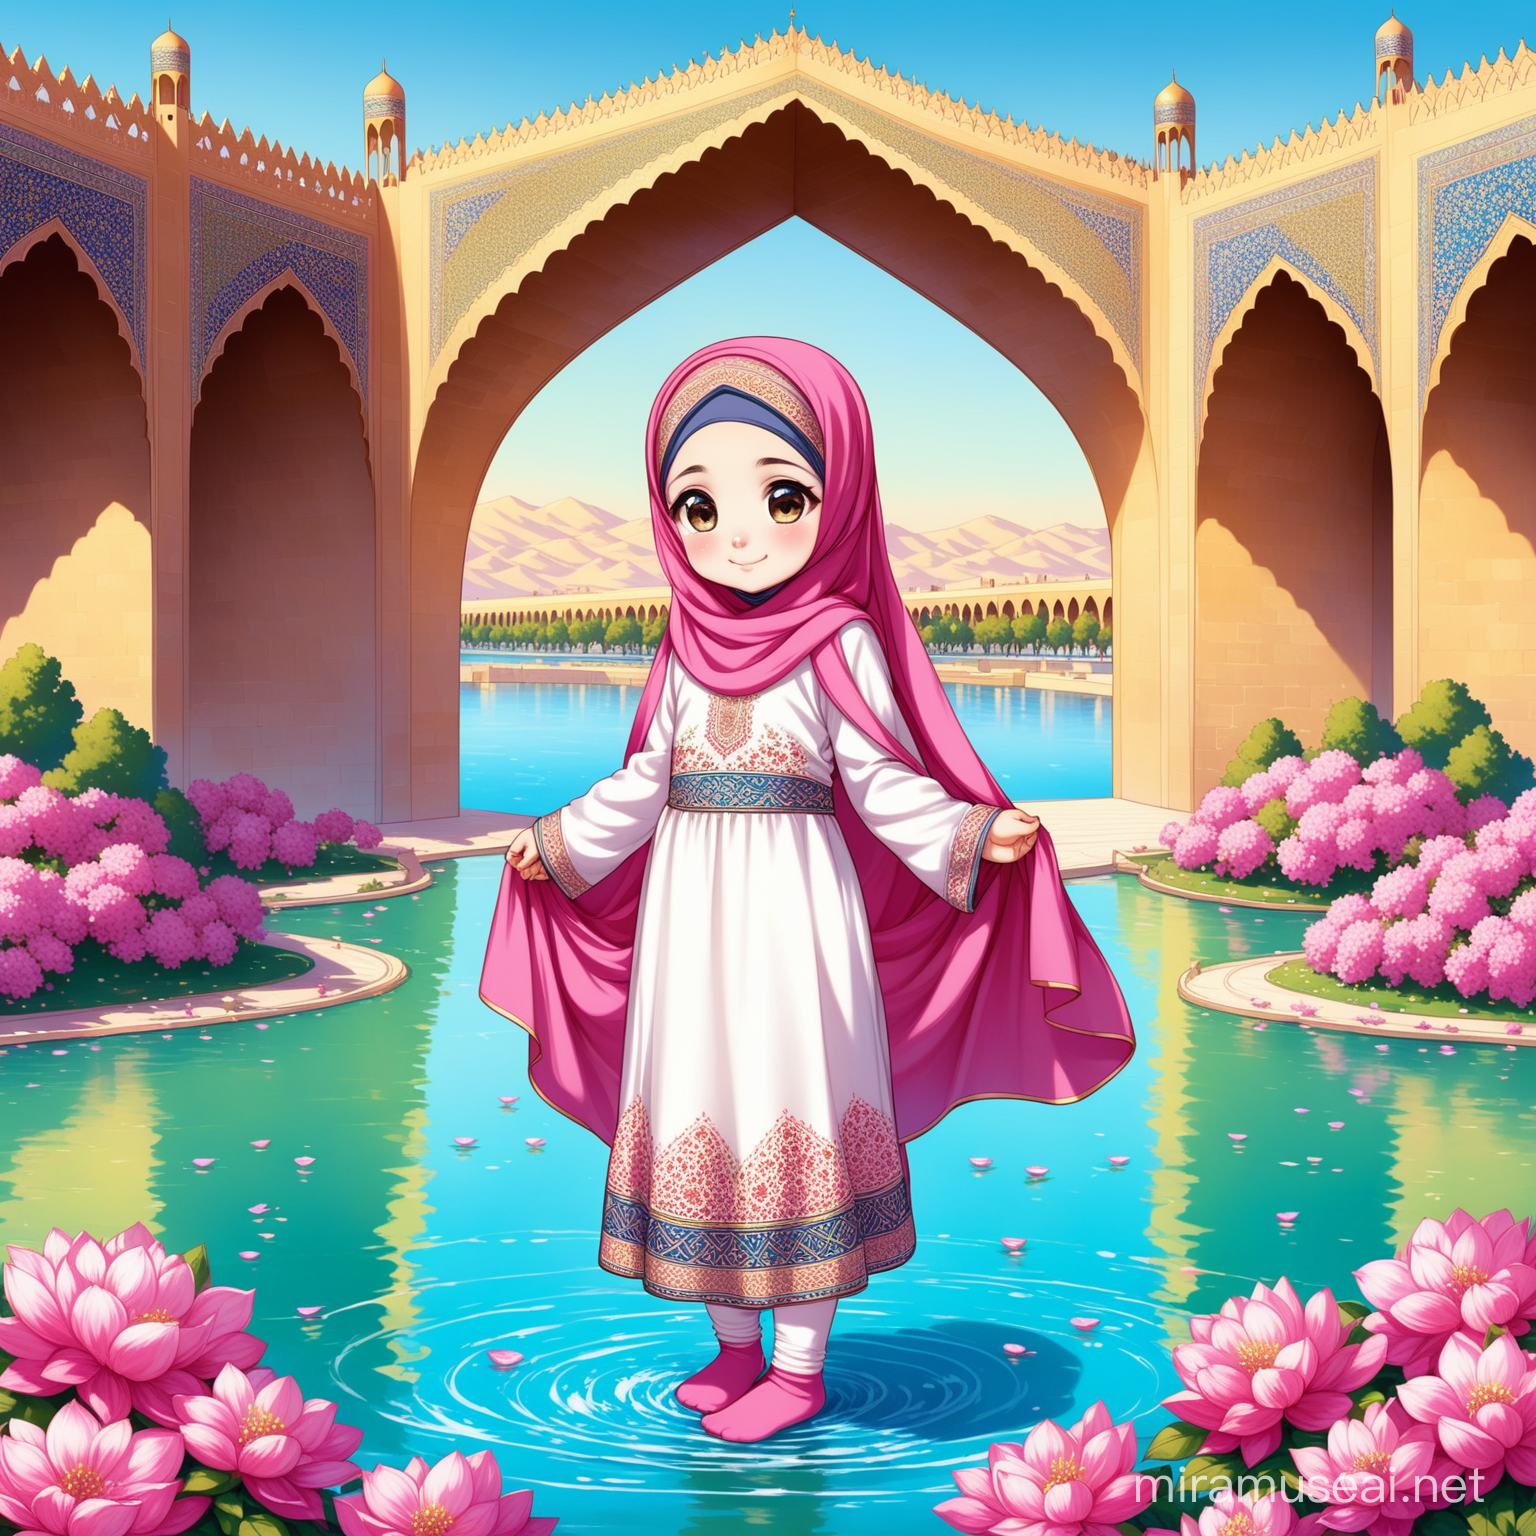 Character Persian little girl(full height, Muslim, with emphasis no hair out of veil(Hijab), smaller eyes, bigger nose, white skin, cute, smiling, wearing socks, clothes full of Persian designs).

Atmosphere Thirty-three bridges of Isfahan, nice flag of Iran proudly raised and full of many pink flowers, lake, sparing.